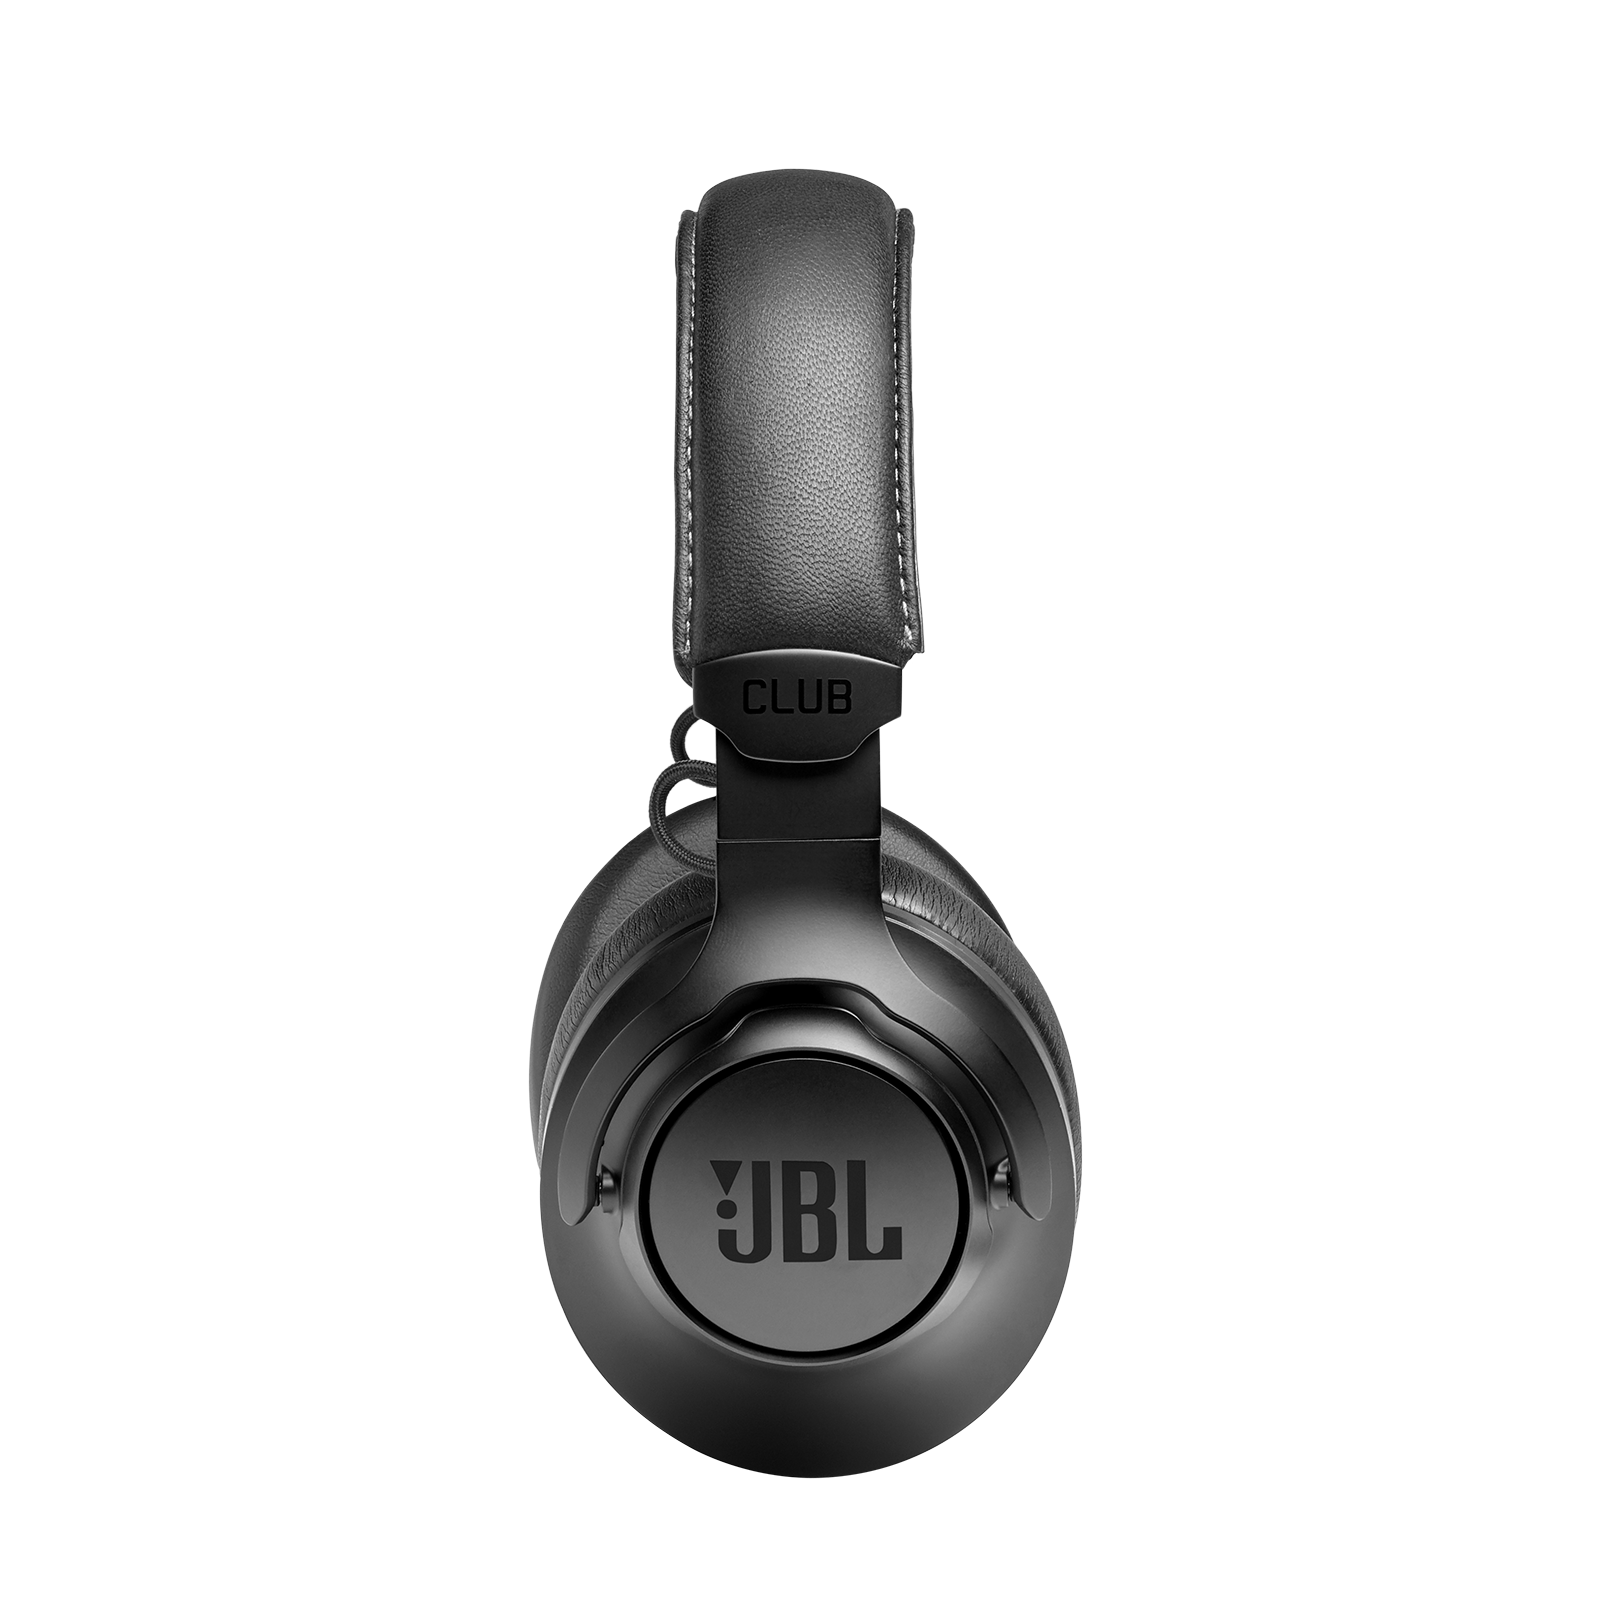 JBL CLUB ONE - Black - Wireless, over-ear, True Adaptive Noise Cancelling headphones inspired by pro musicians - Detailshot 4